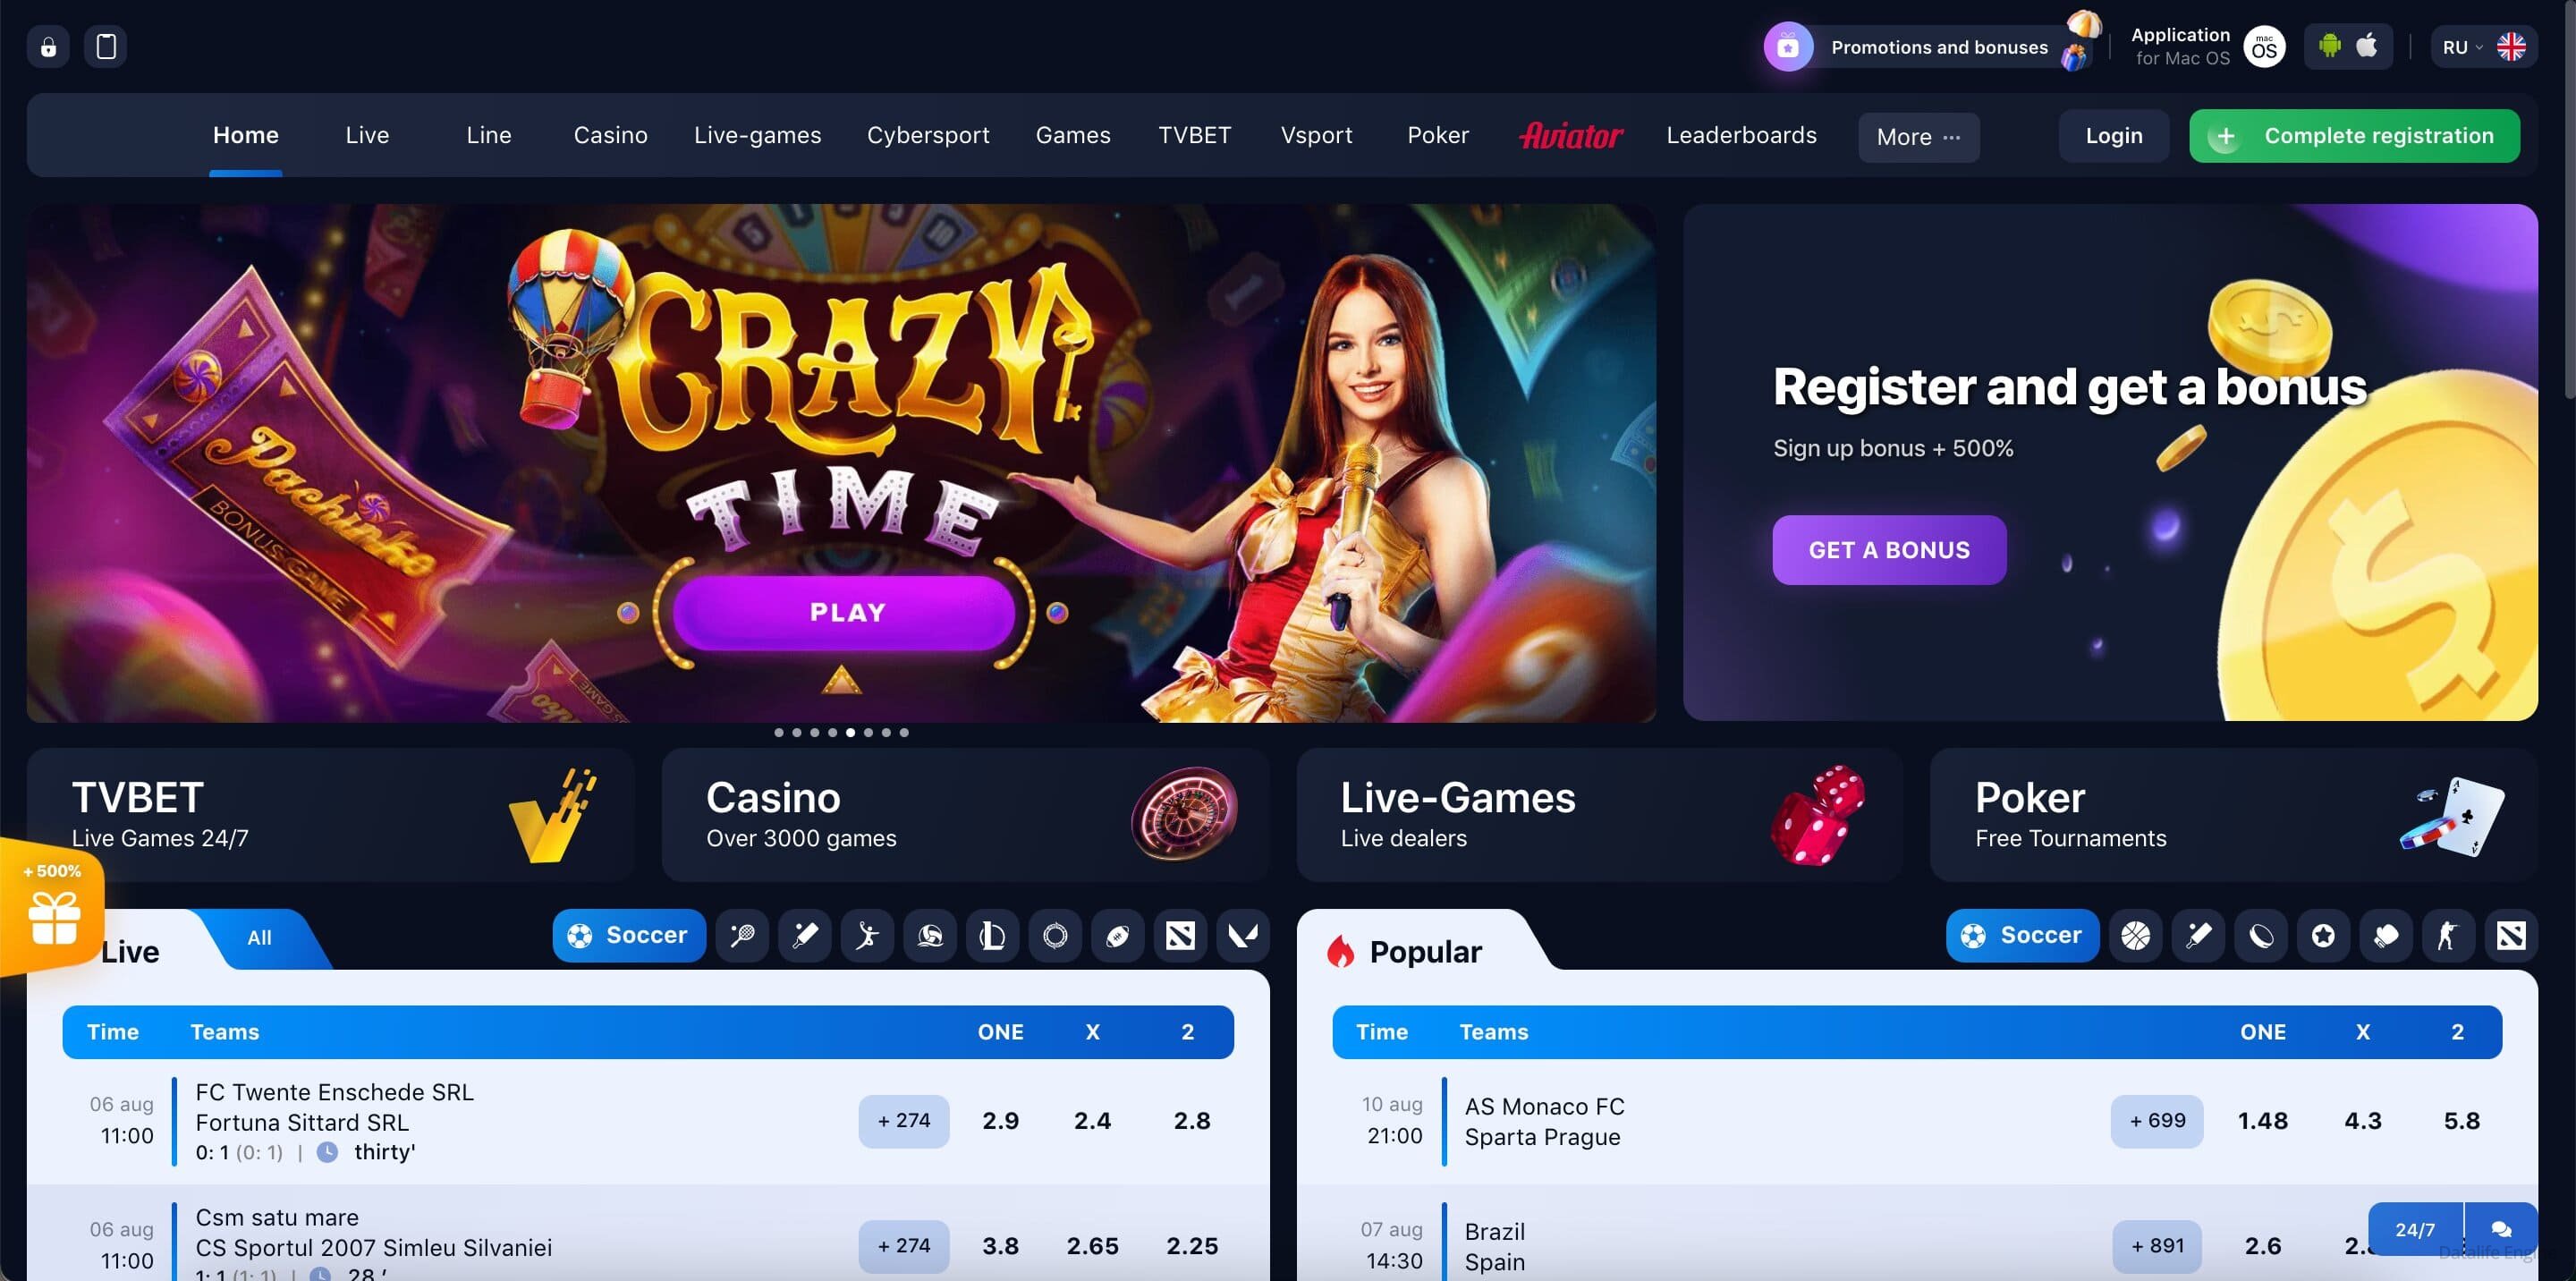 Does 1win online casino Sometimes Make You Feel Stupid?